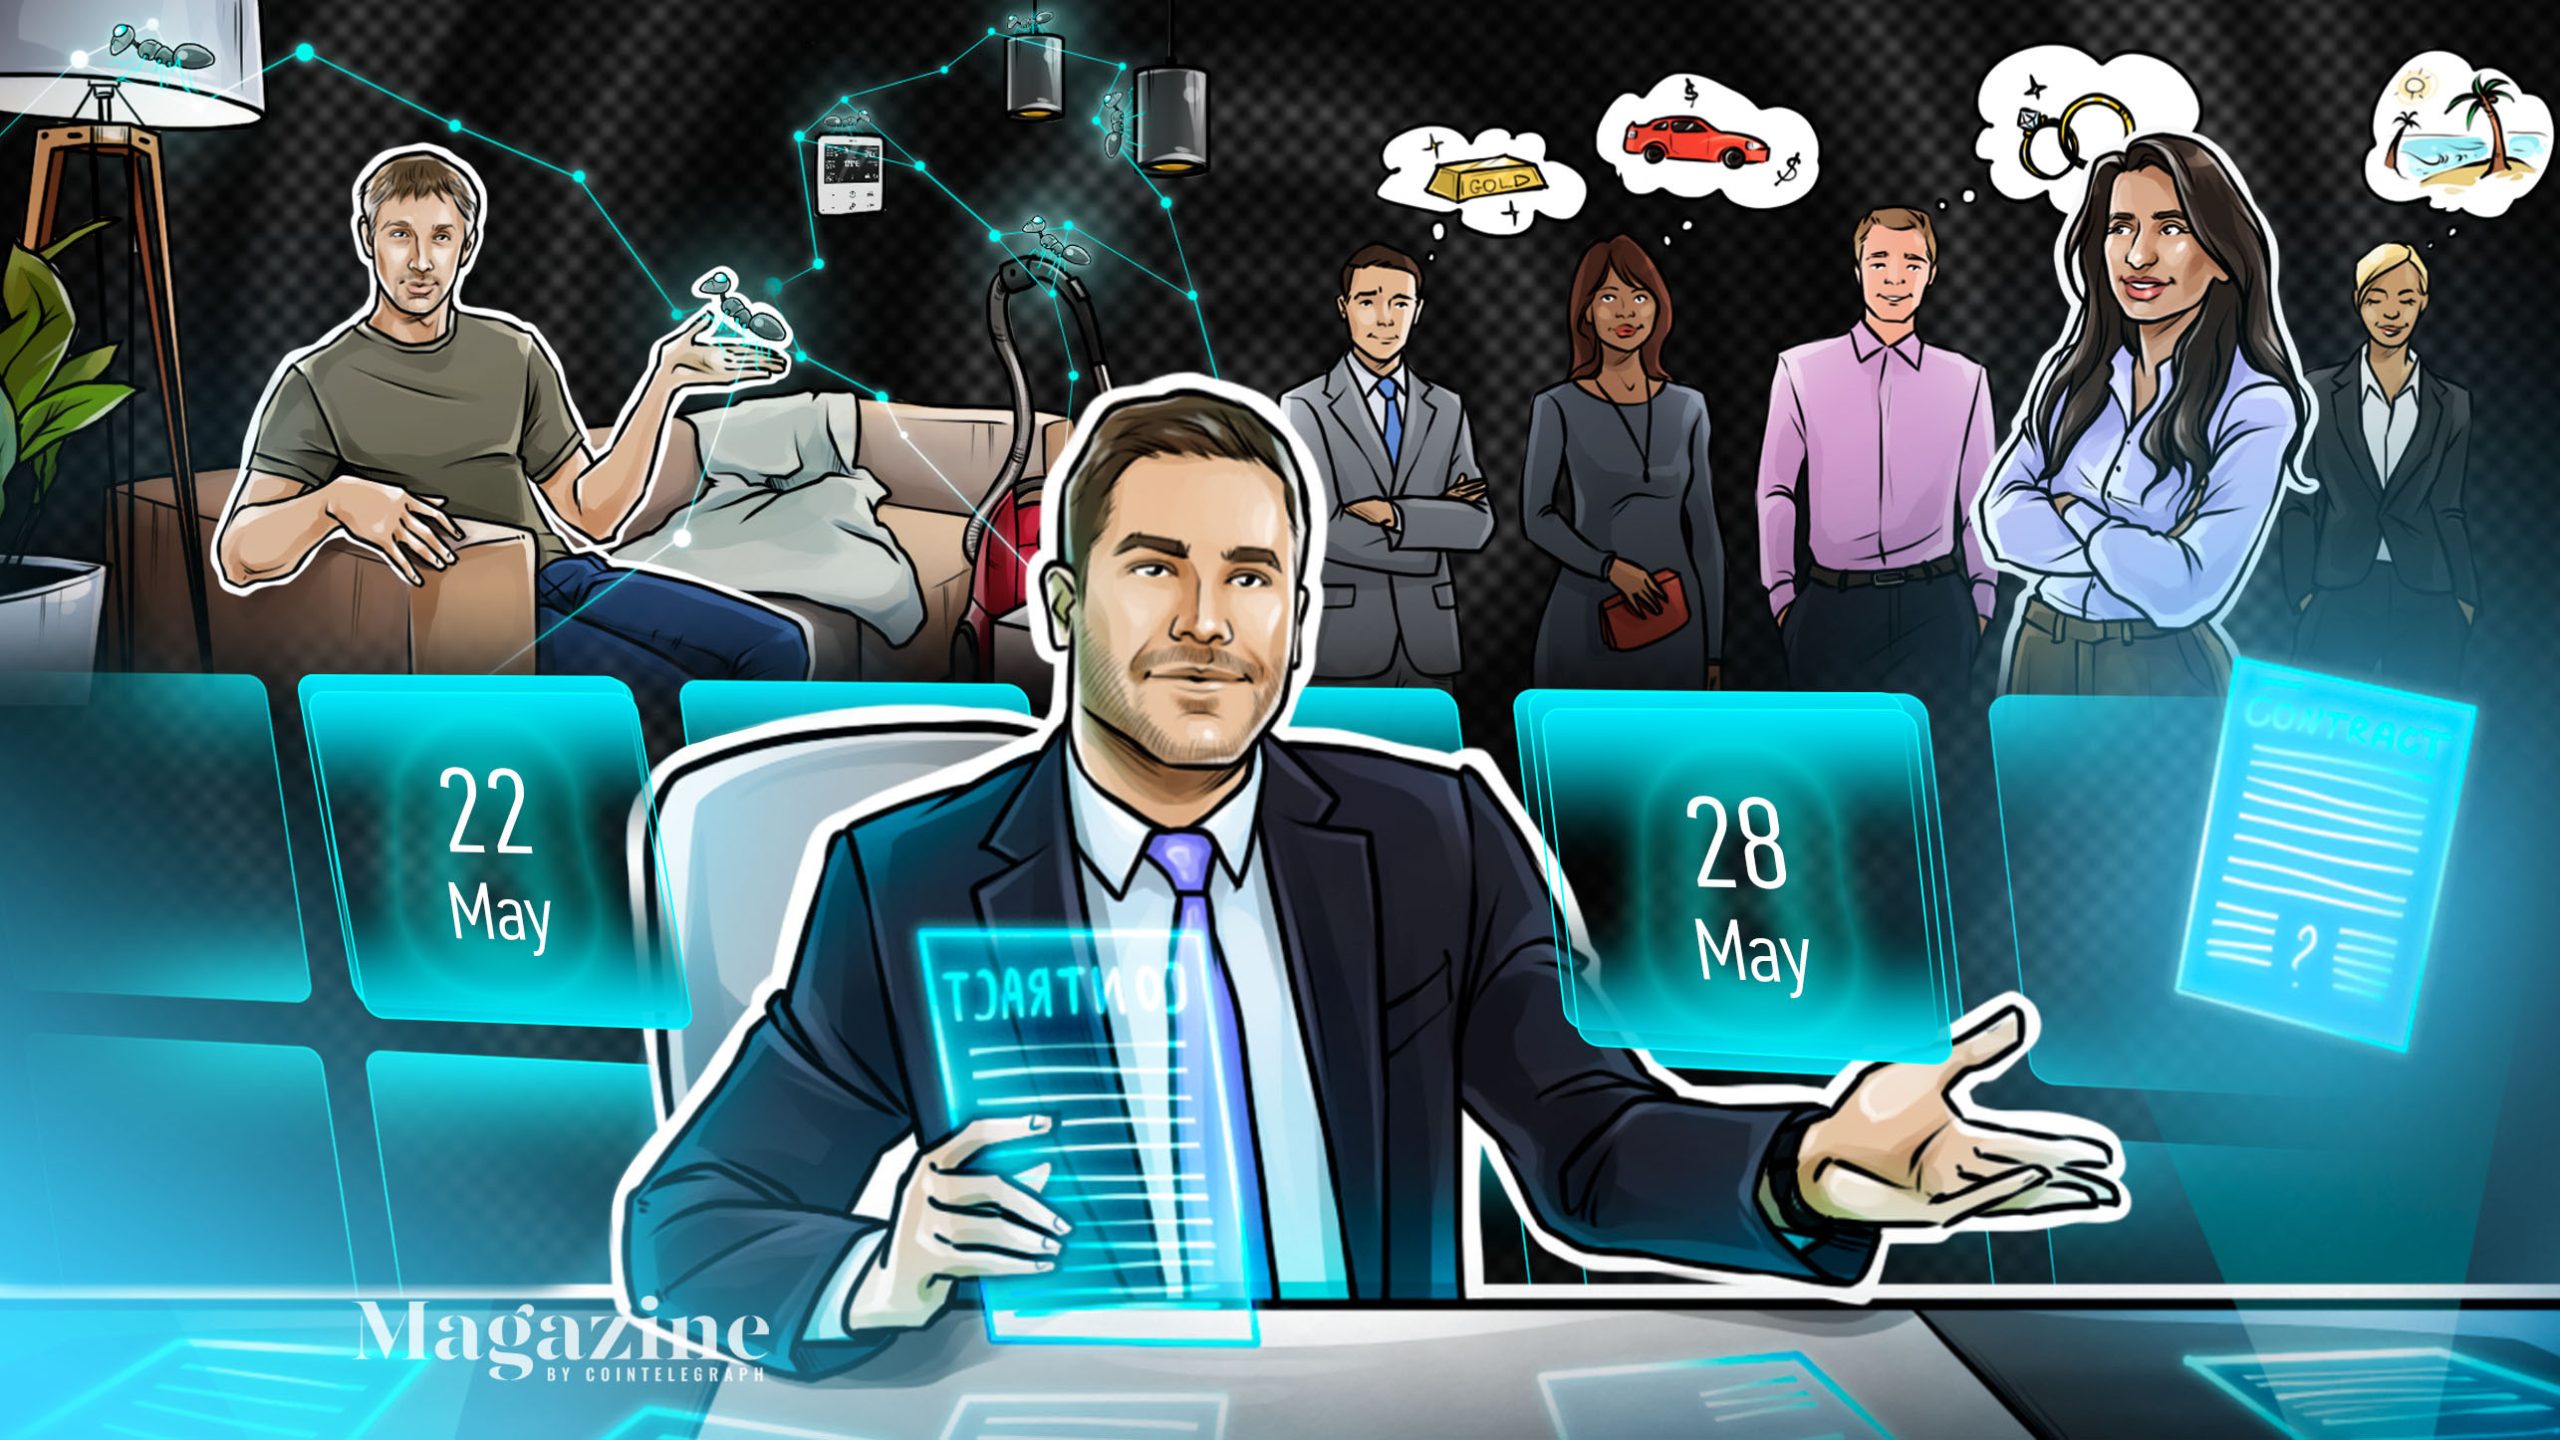 You are currently viewing JPMorgan sees higher BTC price potential, a16z unveils $4.5 billion crypto fund, and PayPal hints at more crypto and blockchain involvement: Hodler’s Digest, May 22-28